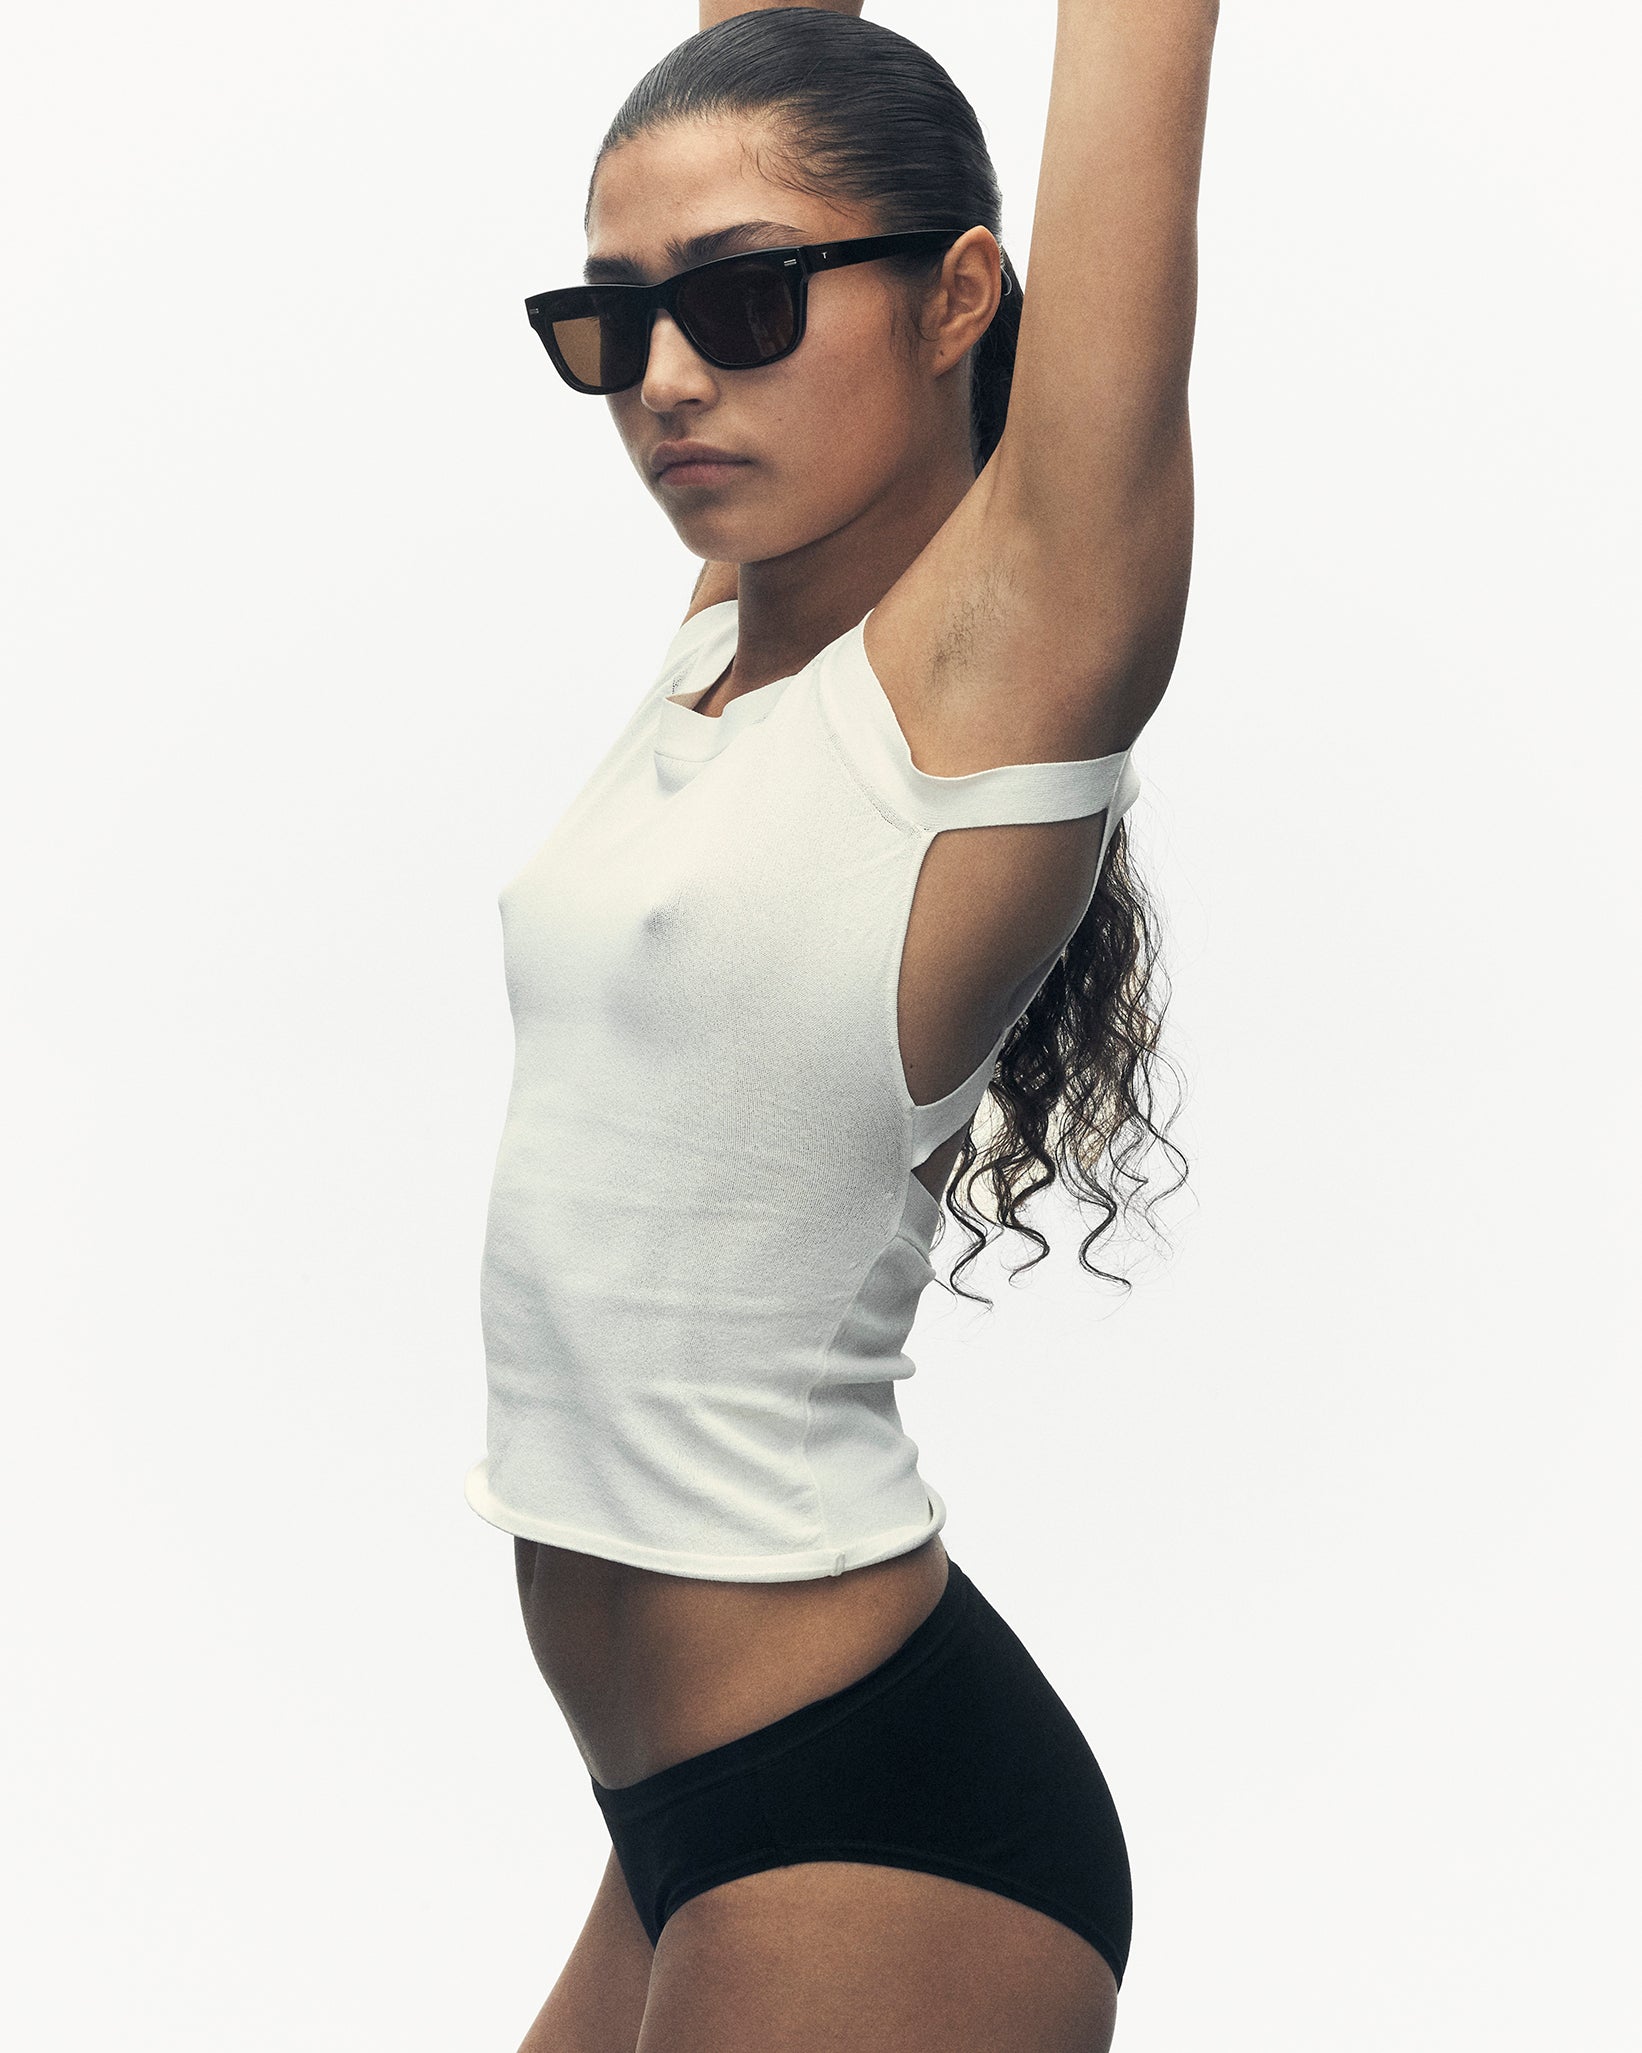 a model with her arms up. she is wearing sunglasses, a white tank top, and black panties.